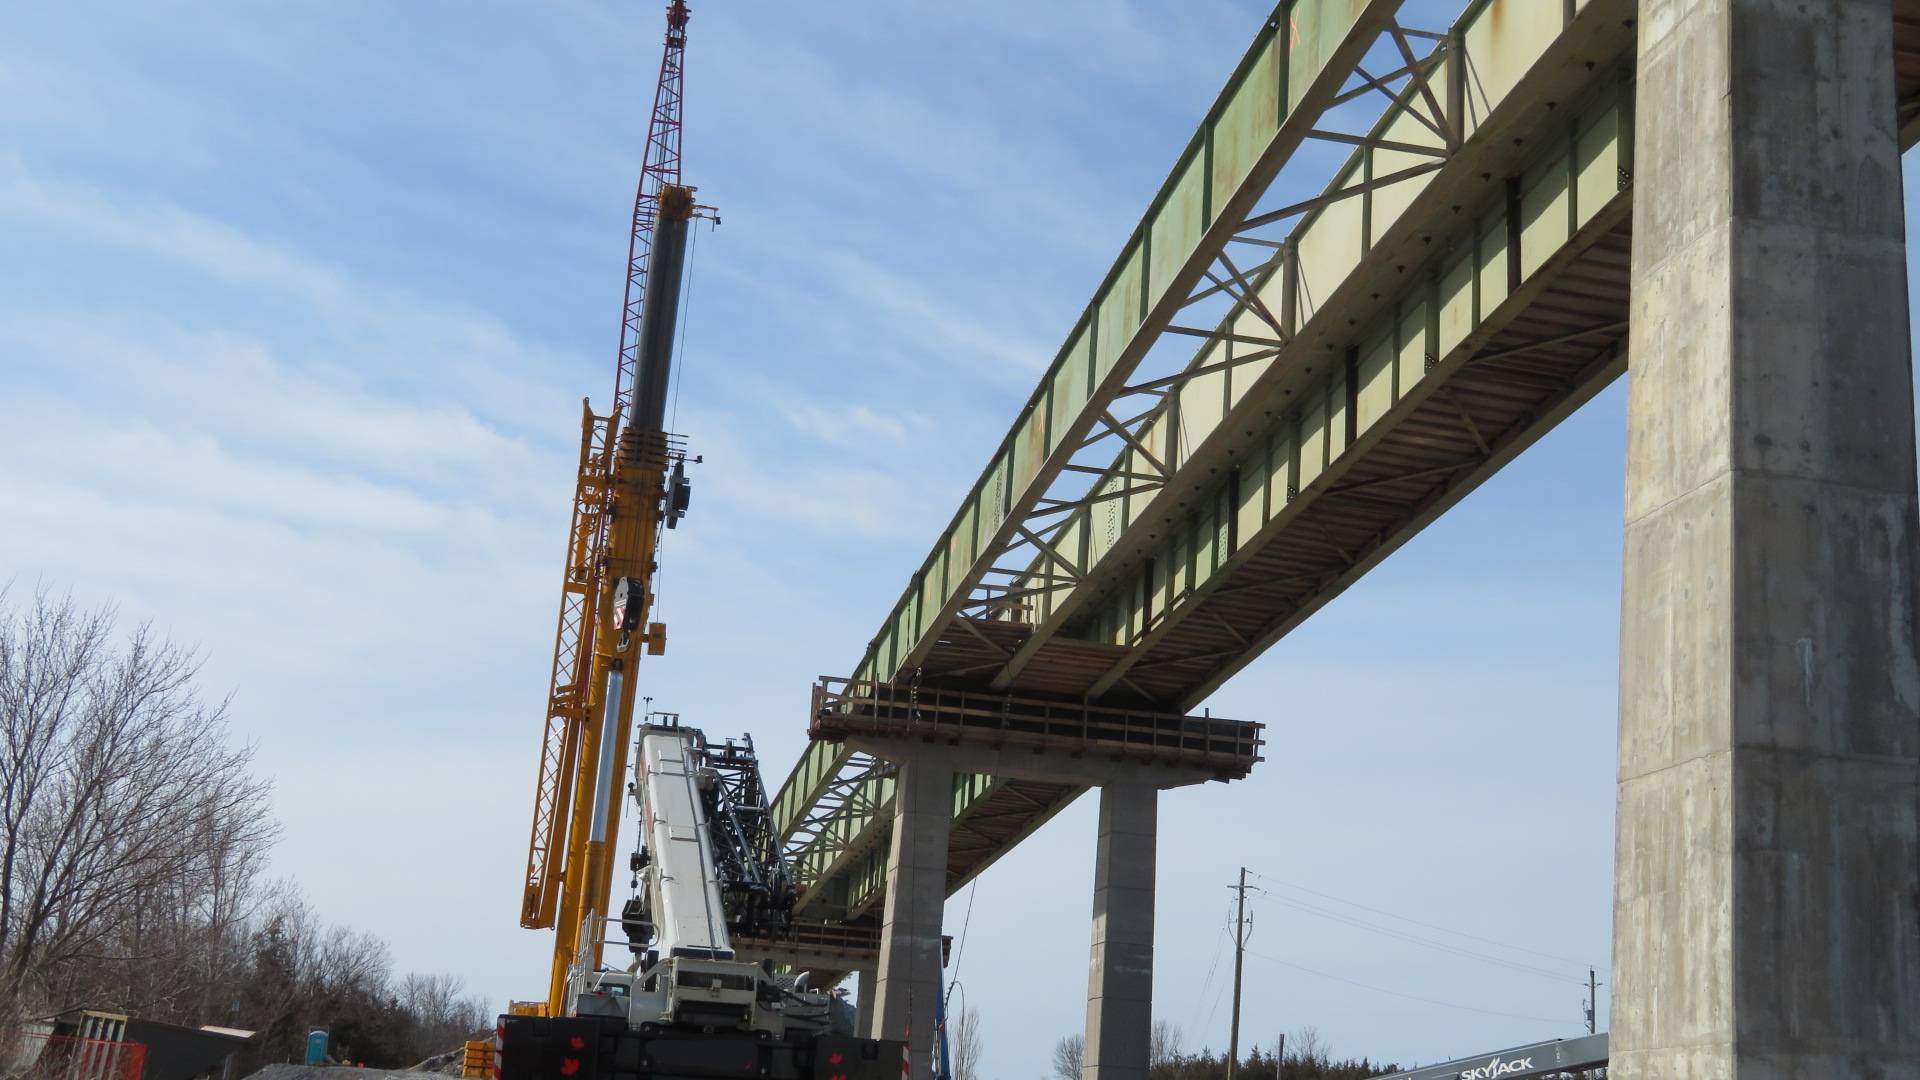 Moving the 160 and 200-ton cranes into place for girder removal